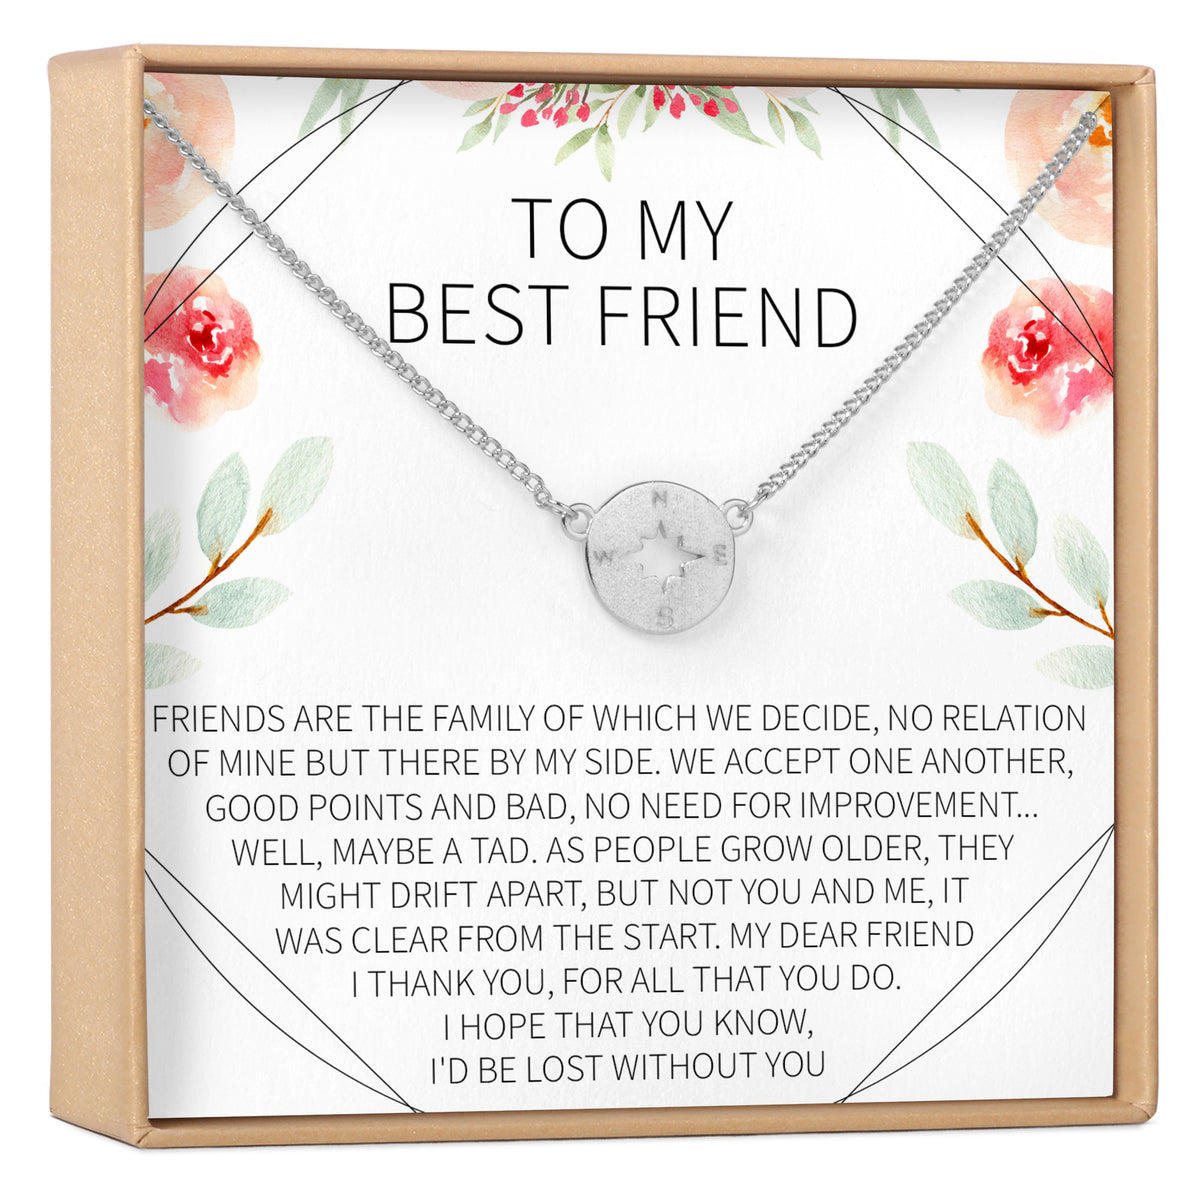 Buy Lanqueen Unicorn Best Friend Necklace BFF Engraved Friendship Jewelry  for 2 Friends Sisters Girls Birthday Gifts, Metal, at Amazon.in